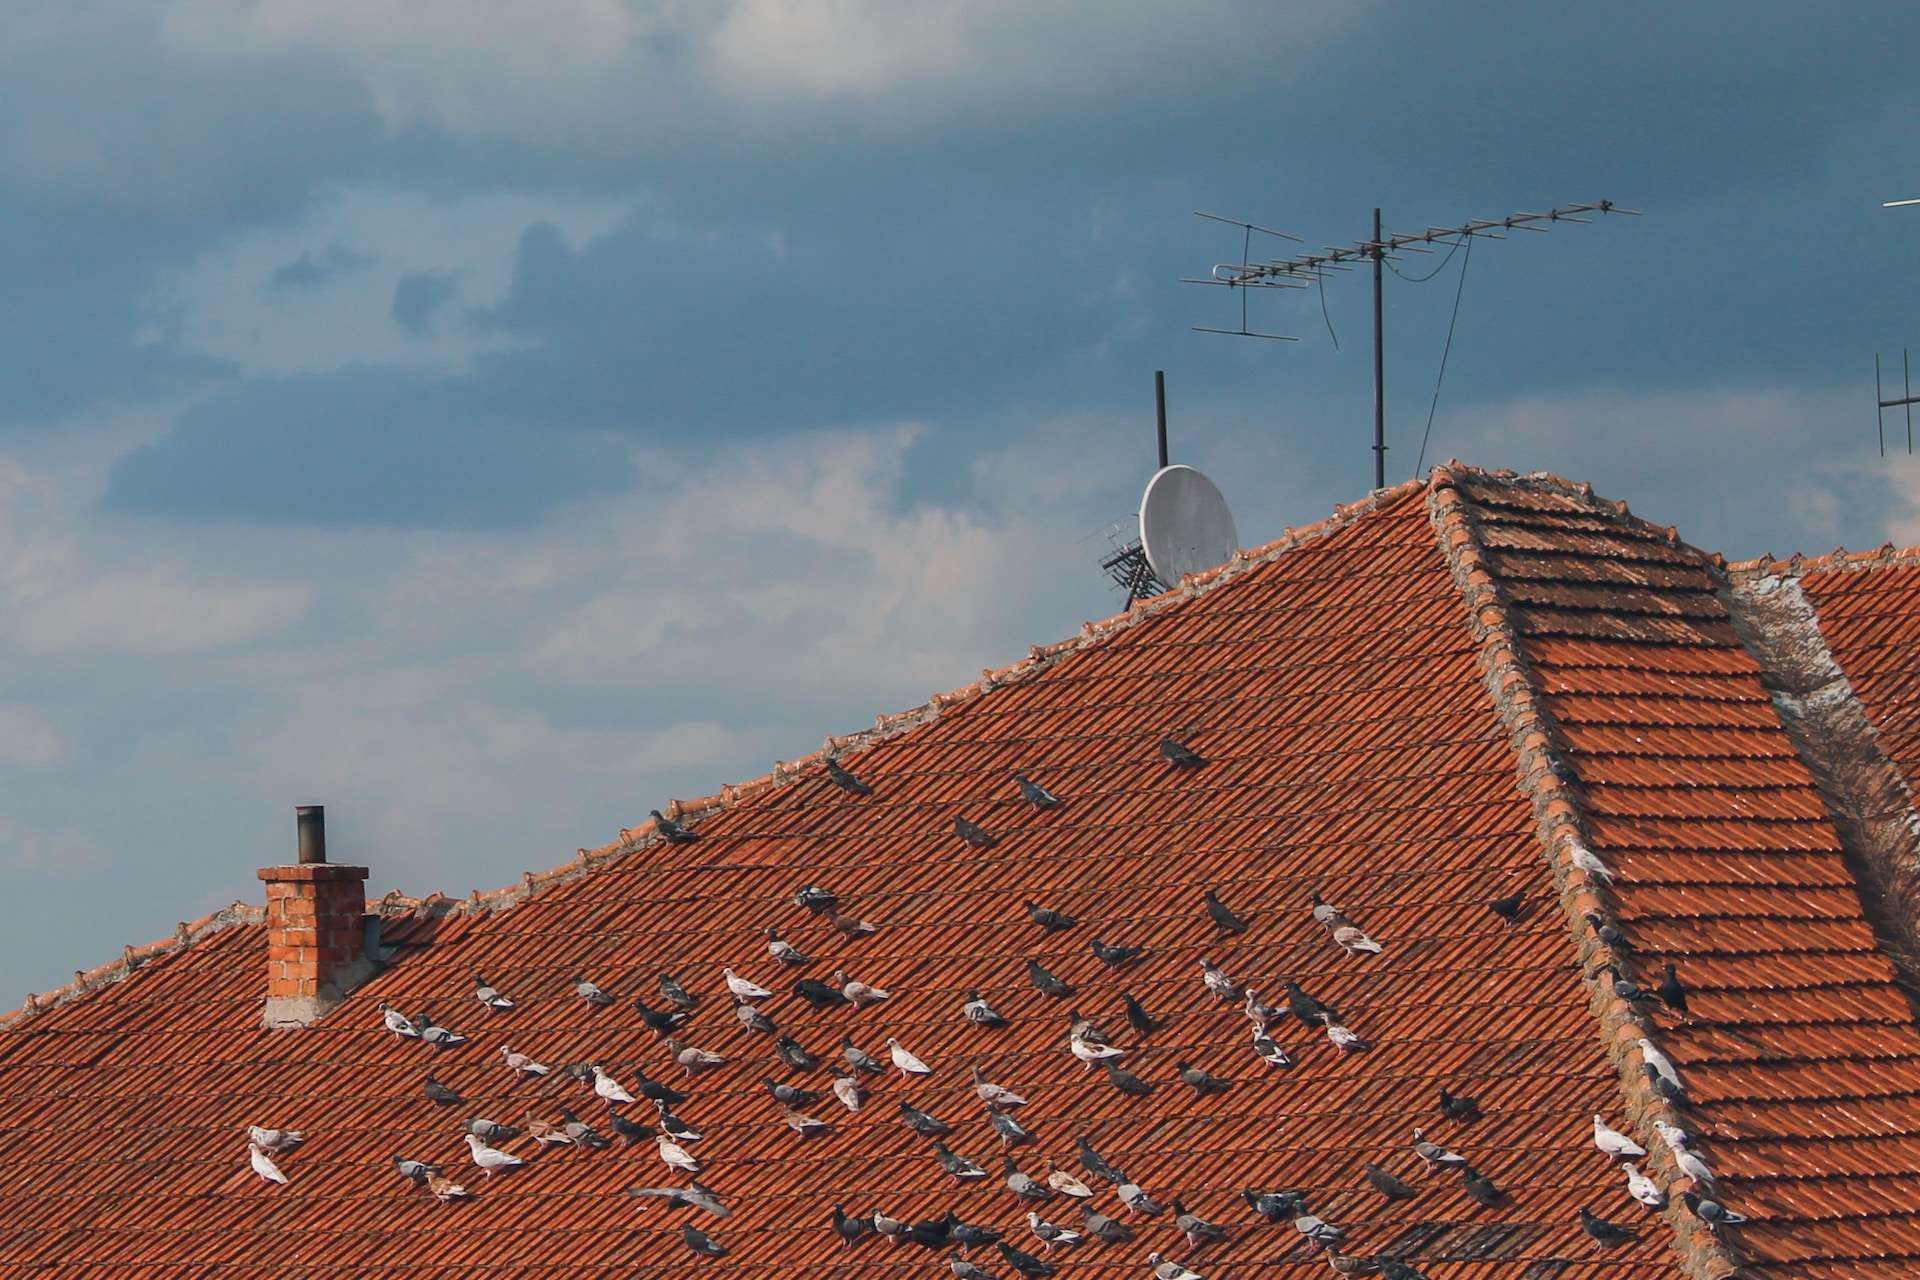 Birds on a red tile roof